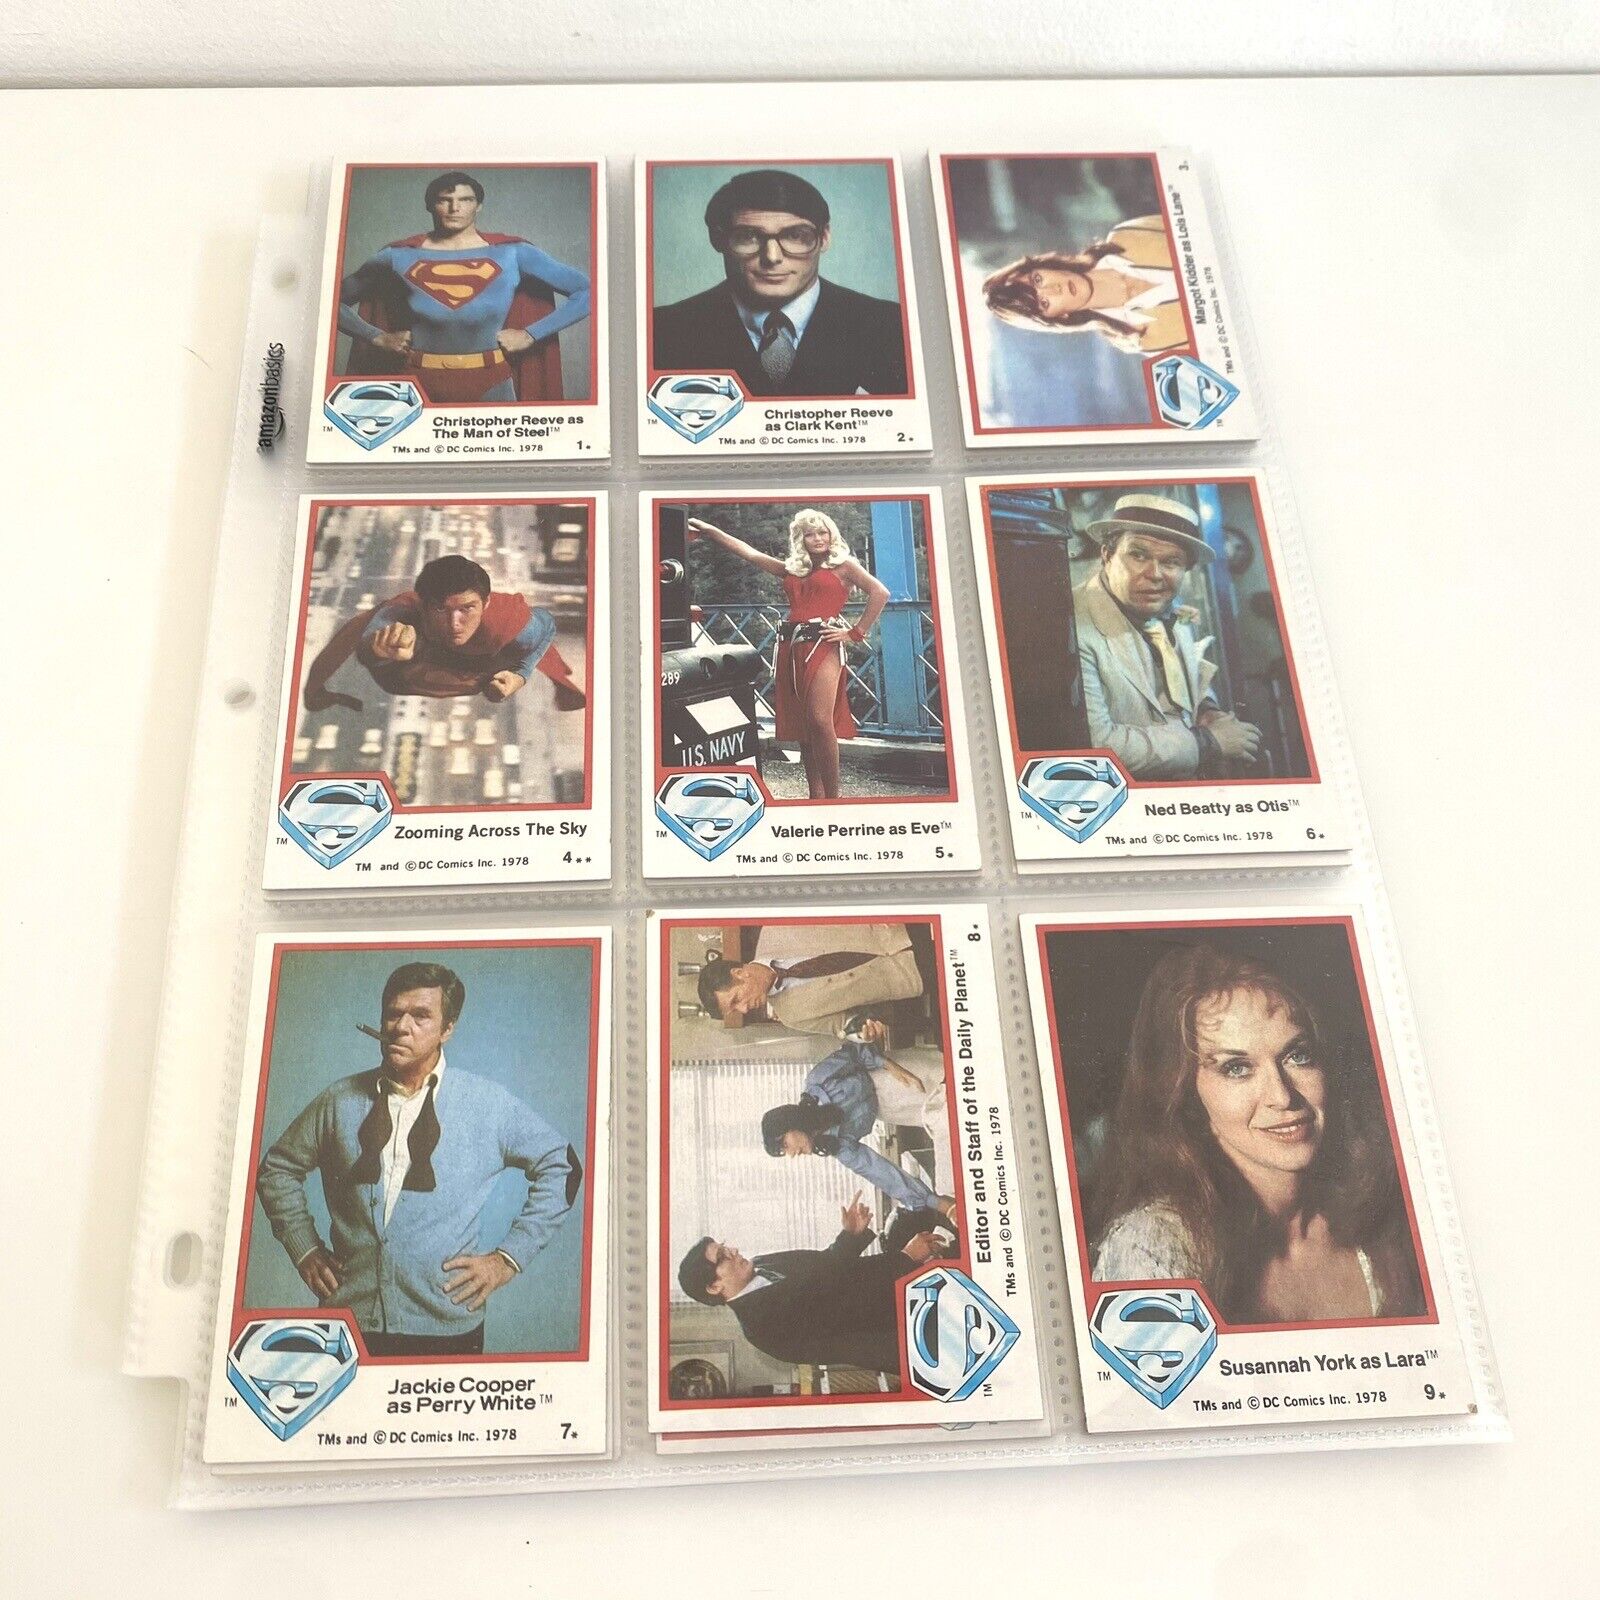 1978 TOPPS SUPERMAN MOVIE SERIES 1 SET COMPLETE 1-77 CARDS + 12 STICKERS